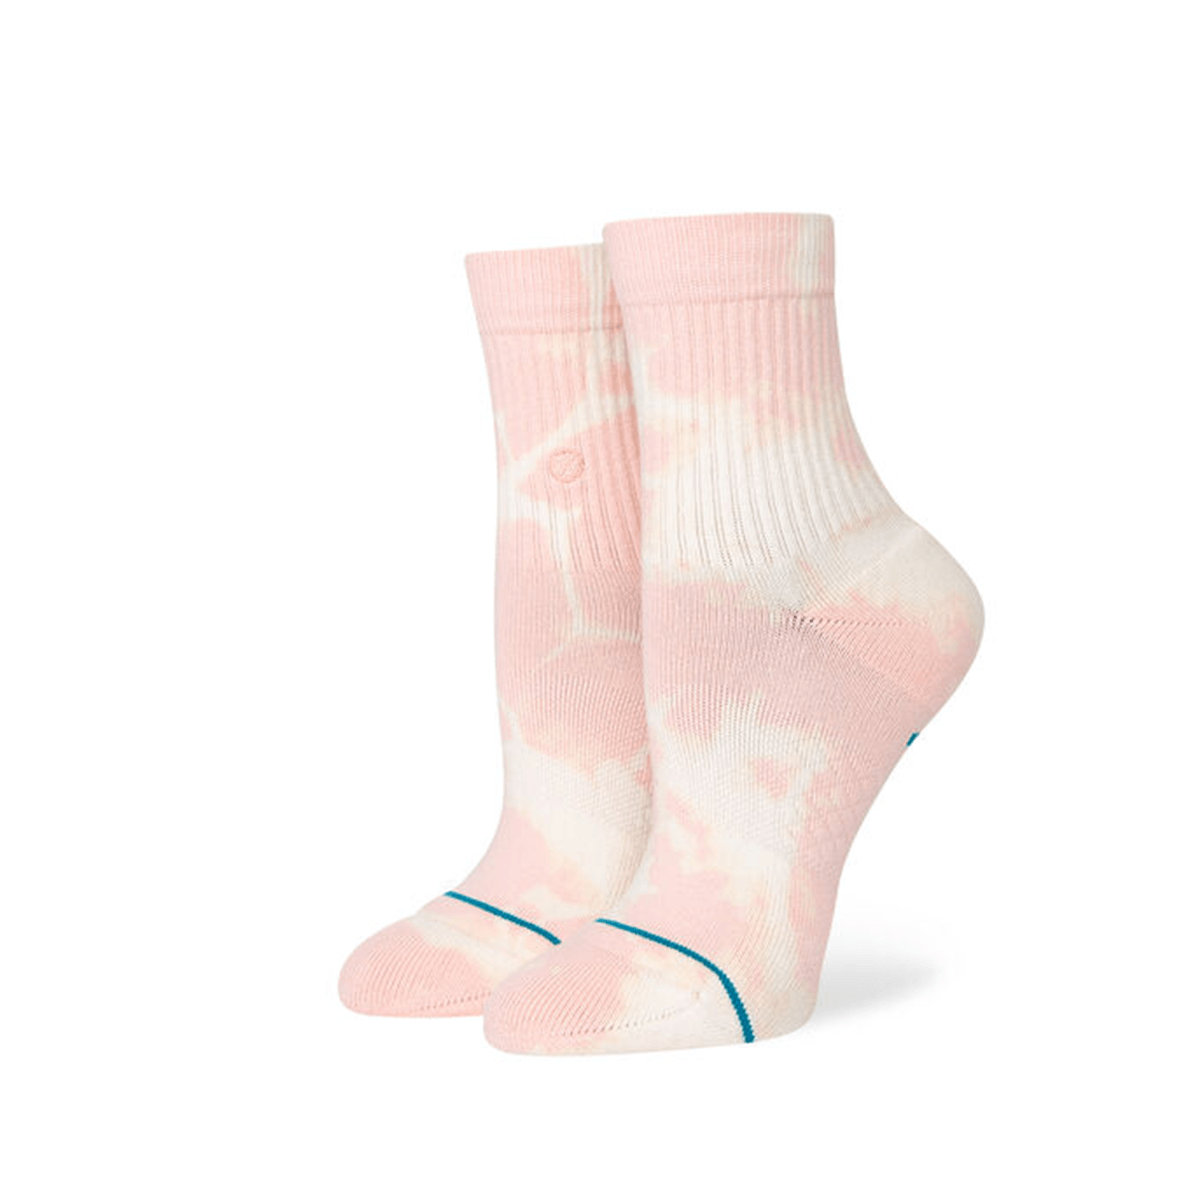 Stance Relevant QTR Socks in Pink - BoardCo